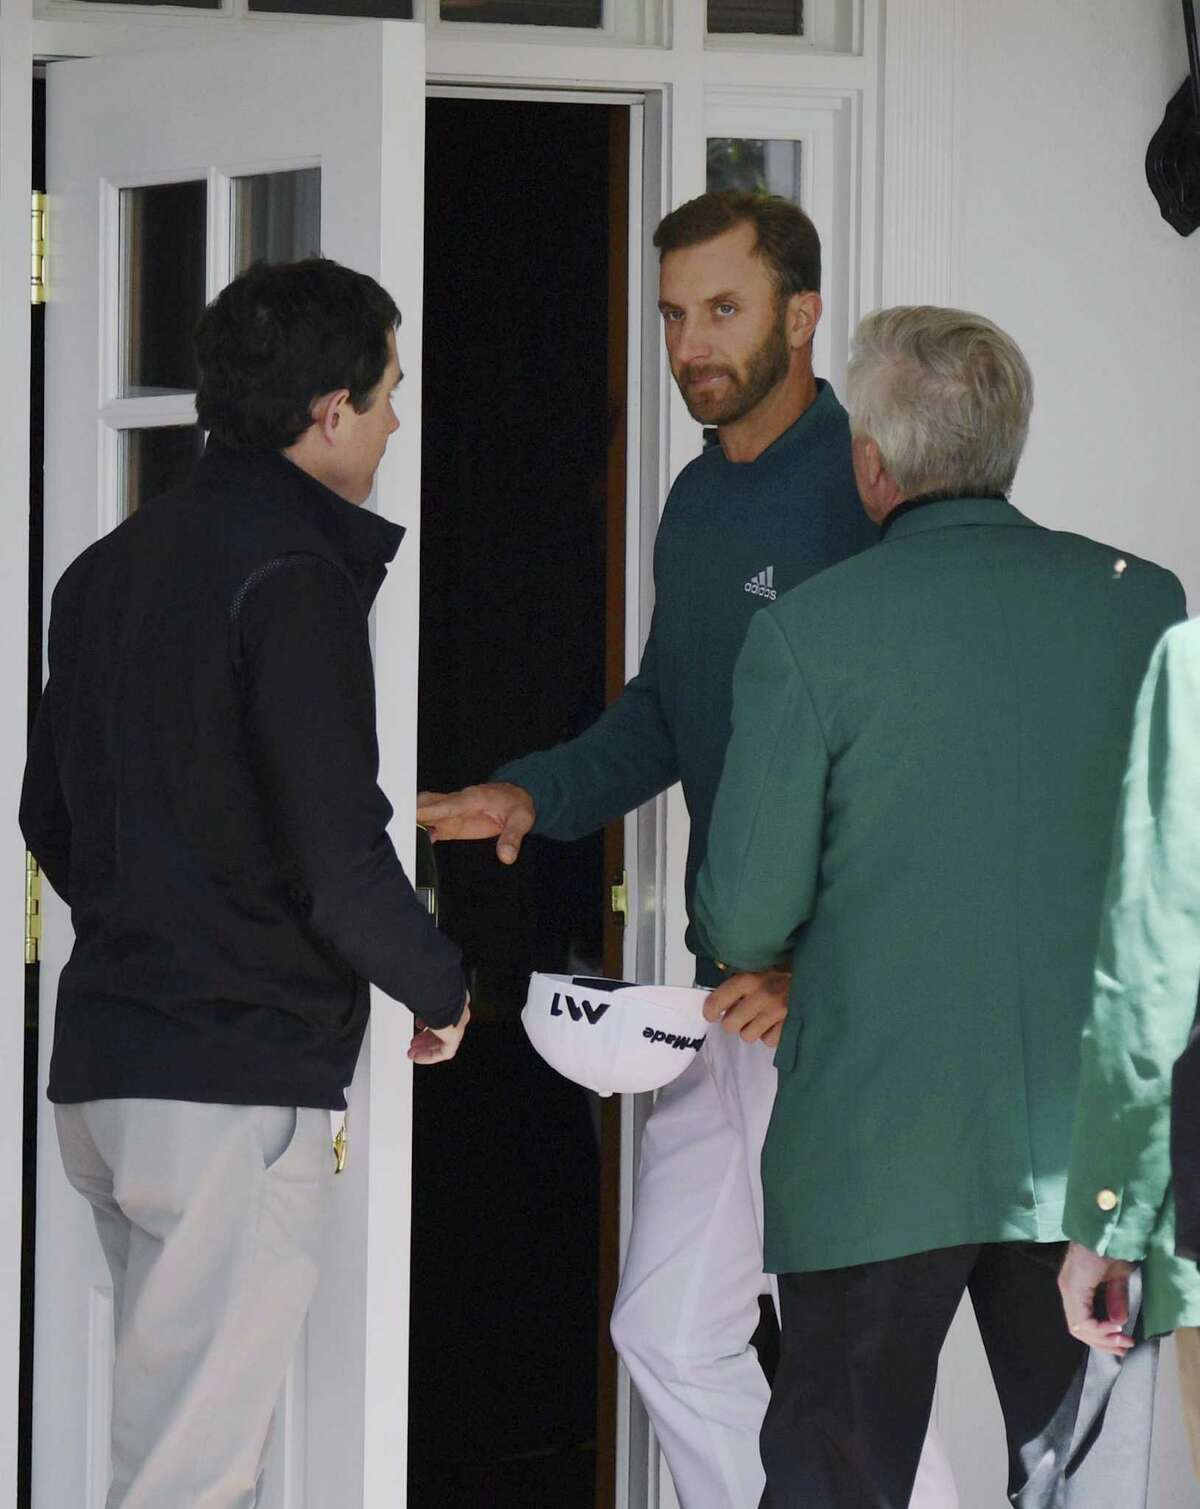 World No. 1 Dustin Johnson enters the clubhouse after deciding his injured back wouldn’t let him play.